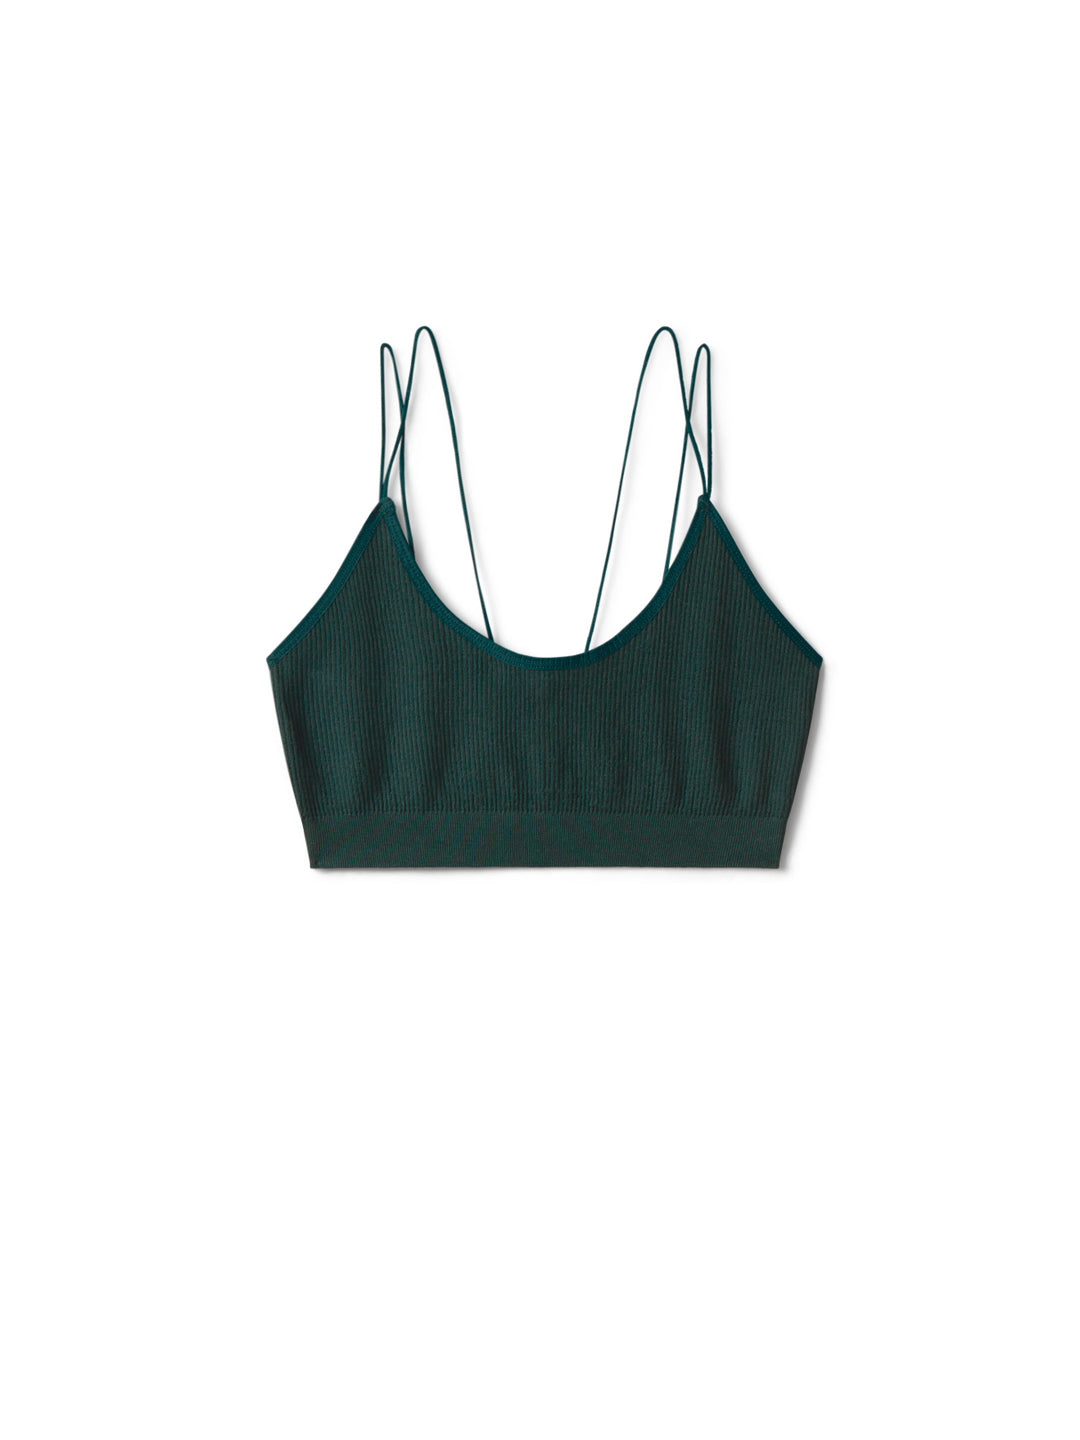 Tops Women - Figueral - Dark Green | Fair Fashion by TWOTHIRDS